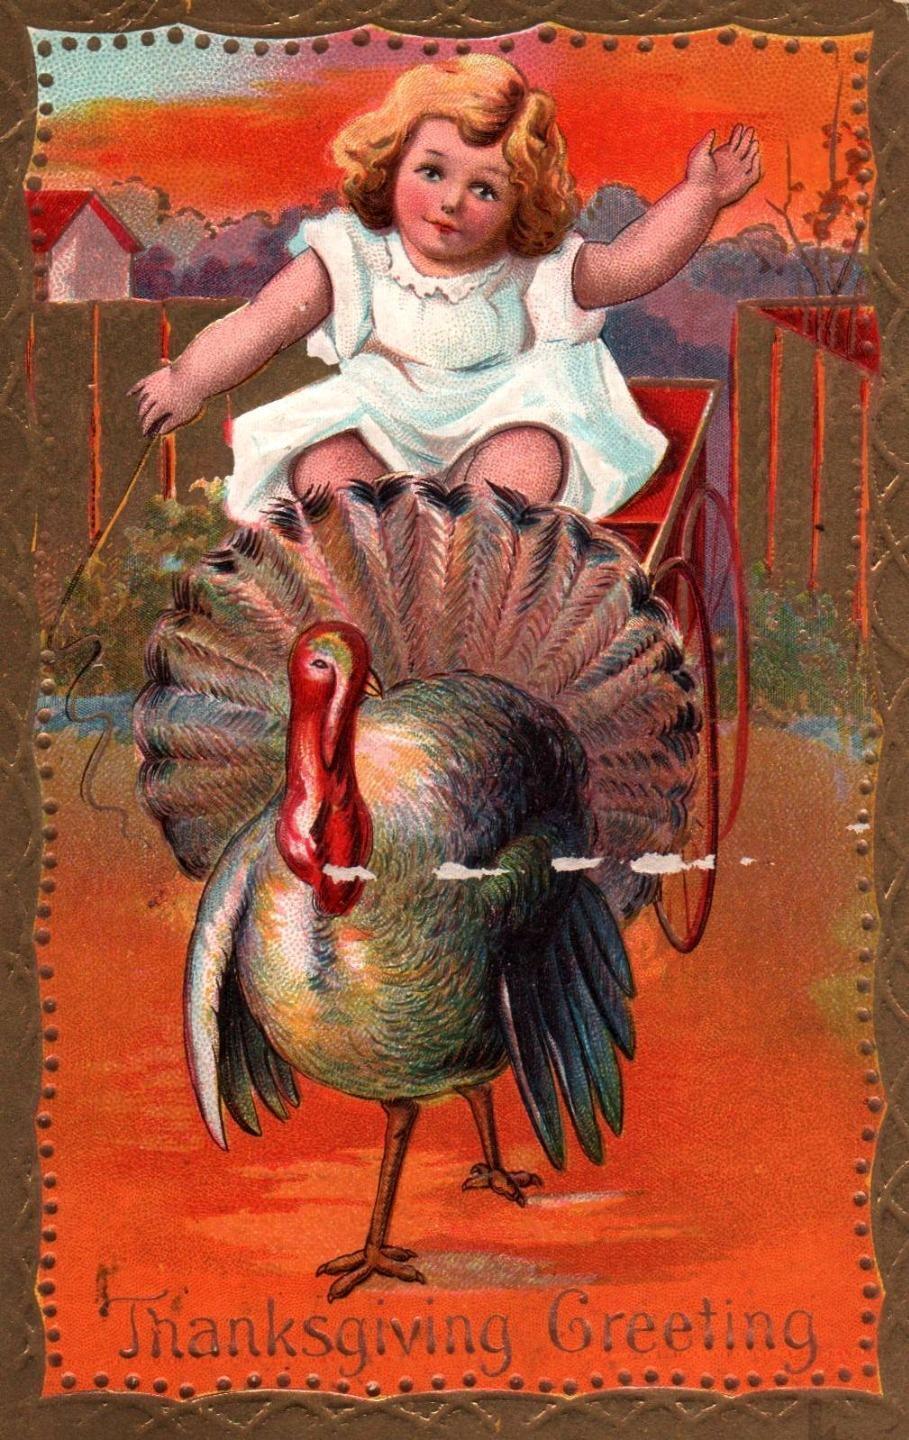 TURKEY PULLS Lovely GIRL In CART On Colorful Vintage 1913 THANKSGIVING Postcard